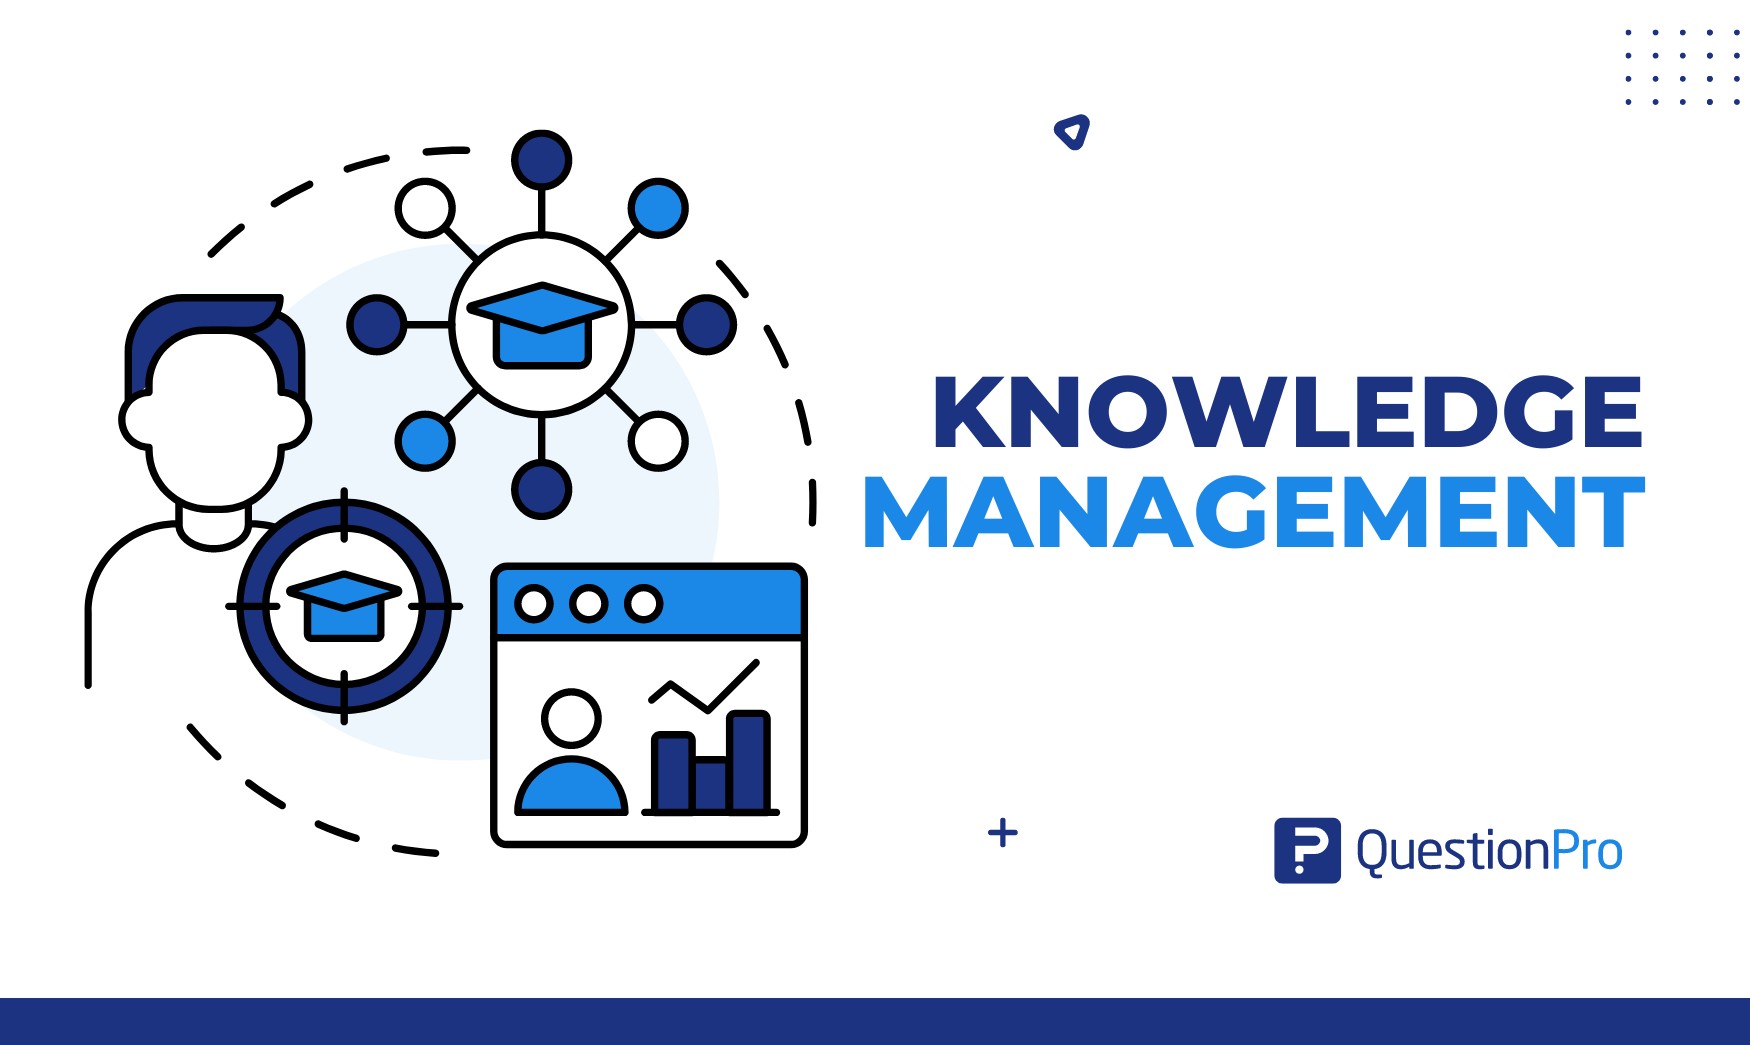 Knowledge Management: What it is, Types, and Use Cases